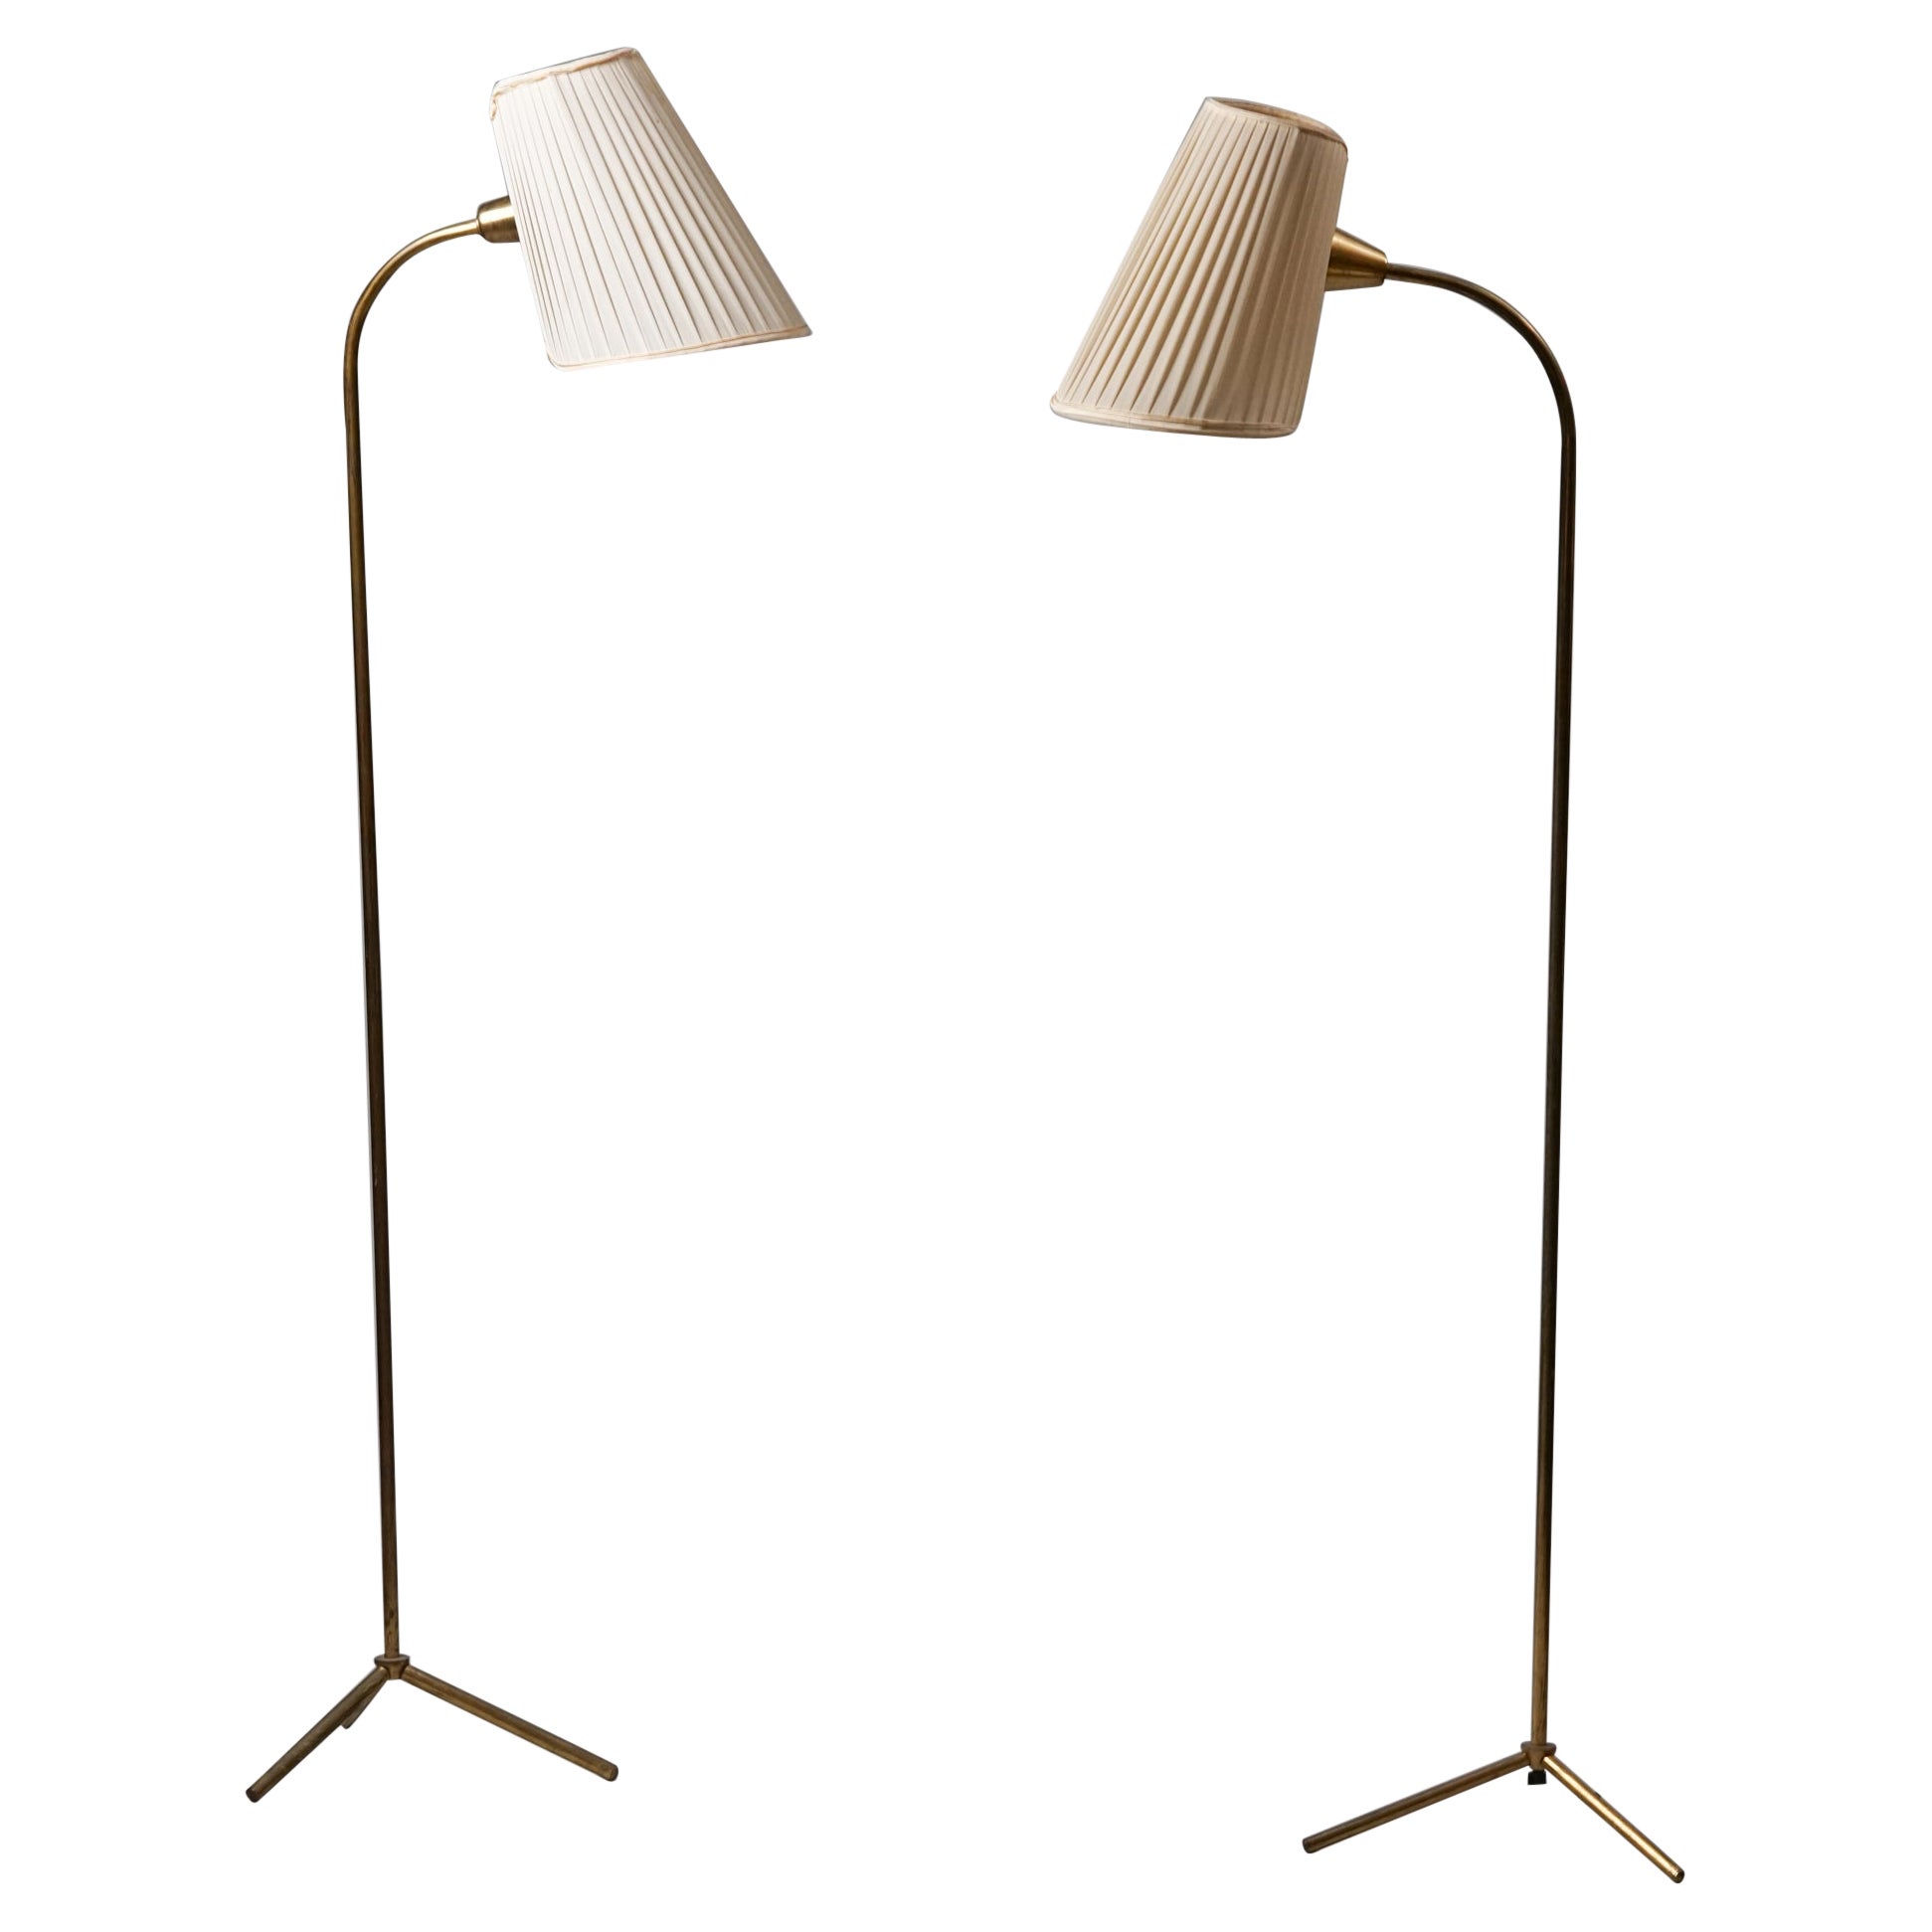 Set of Two Scandinavian Modern Floor Lamps, Stockmann/Orno Oy, 1950s  For Sale